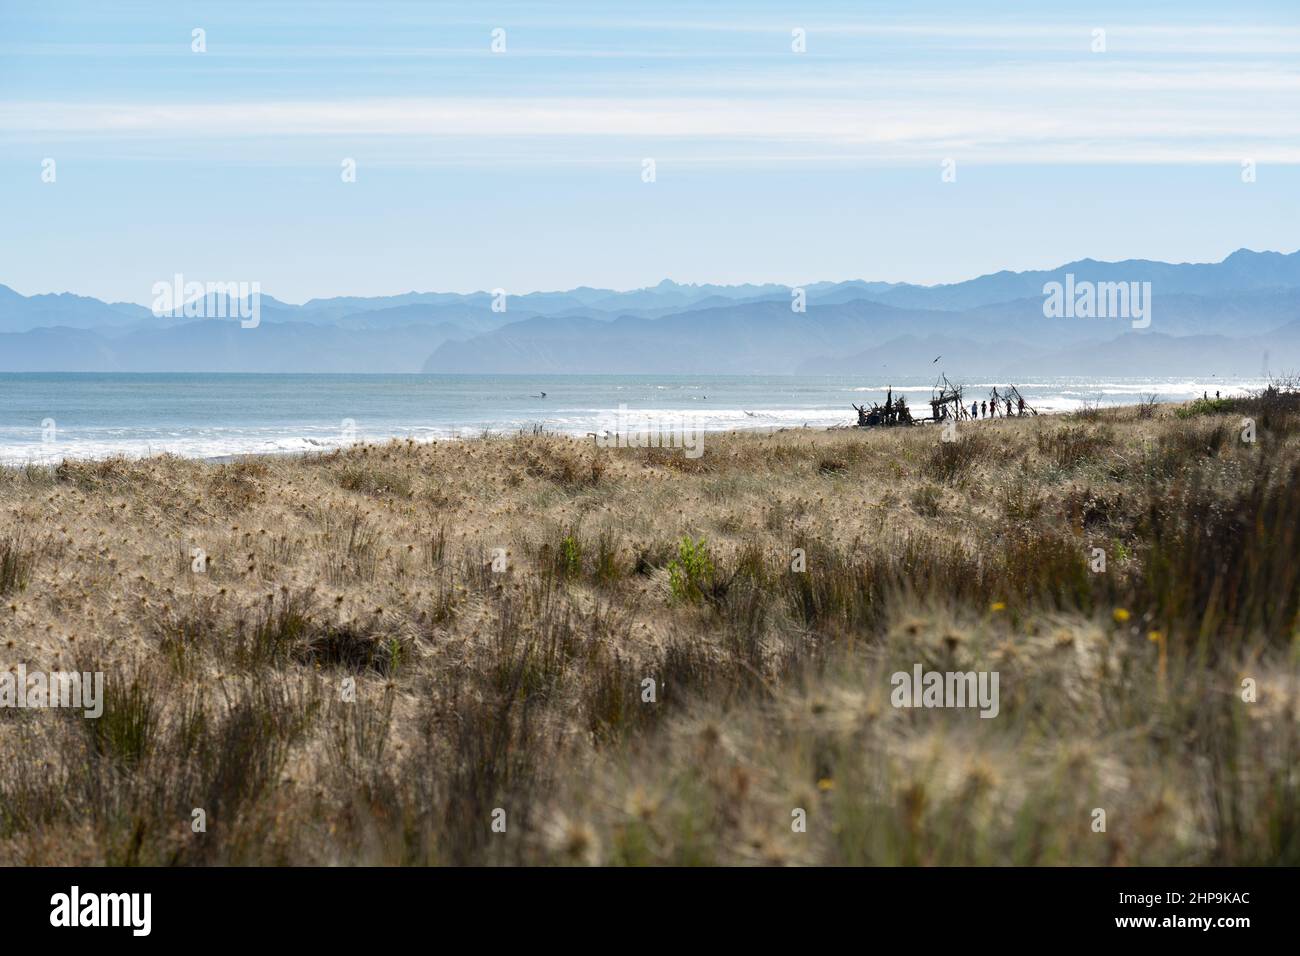 A sunny day on an east coast beach in the North Island of New Zealand Stock Photo